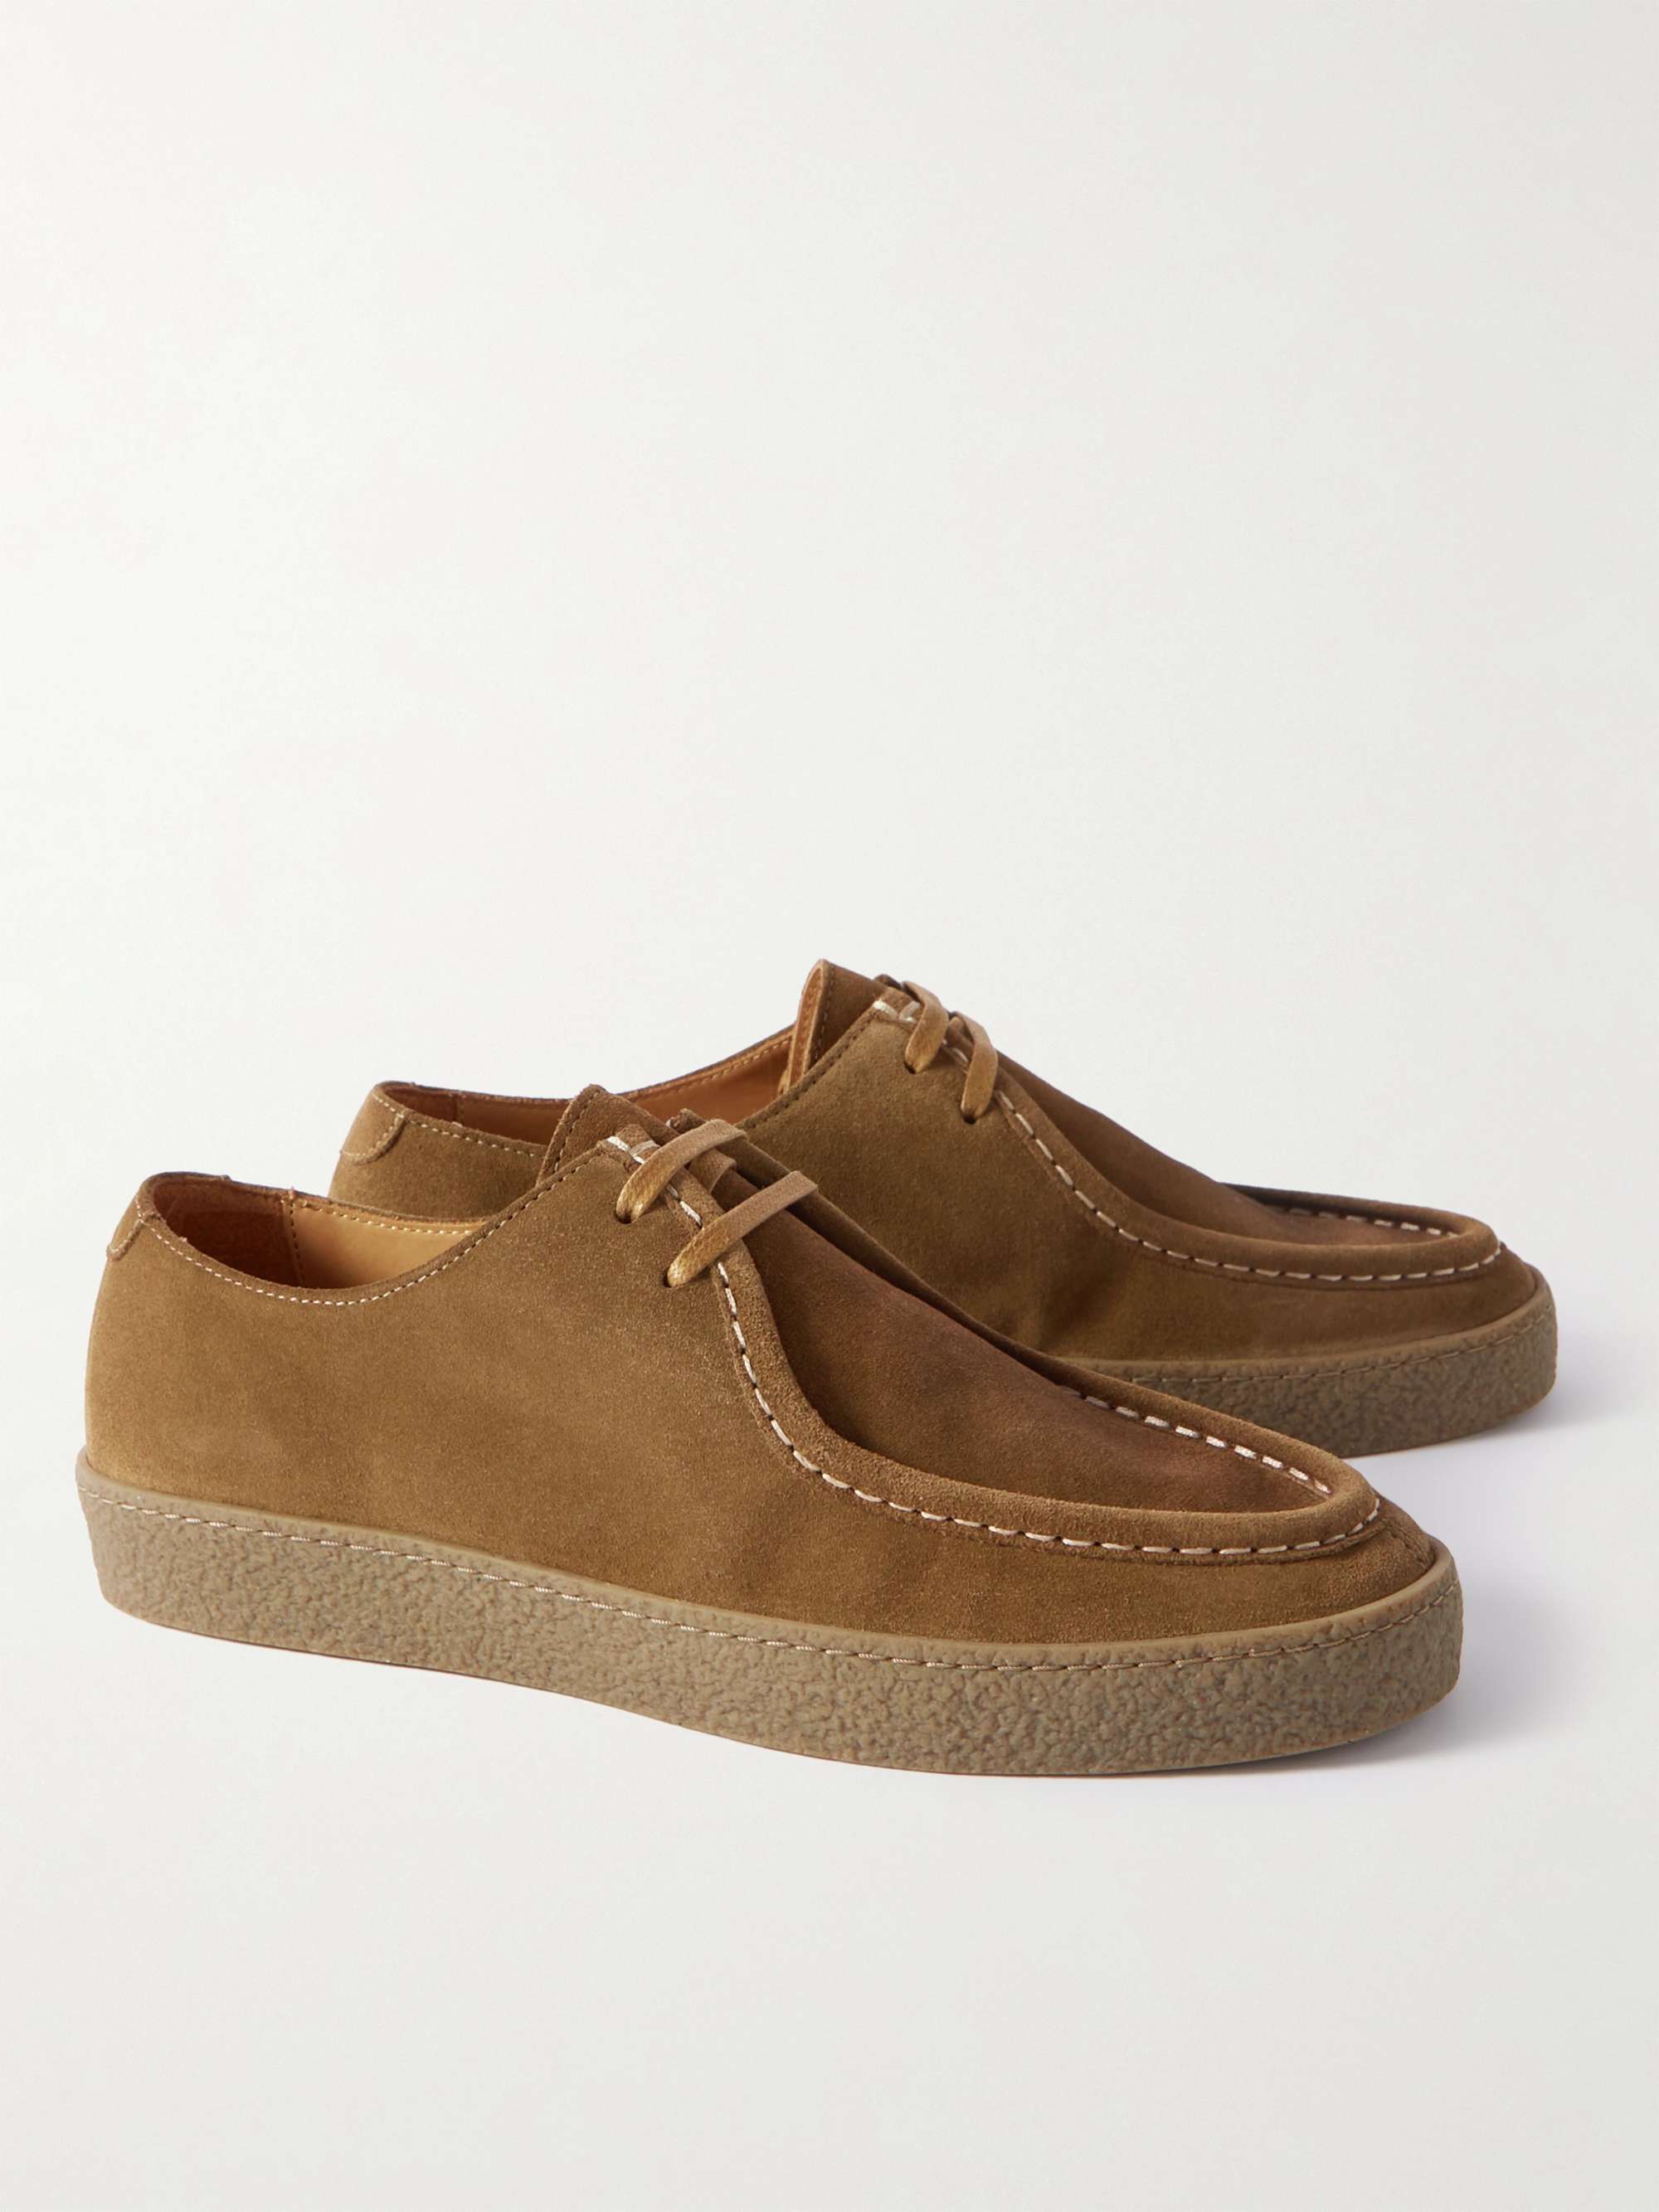 MR P. Larry Regenerated Suede by evolo® Derby Shoes for Men | MR PORTER